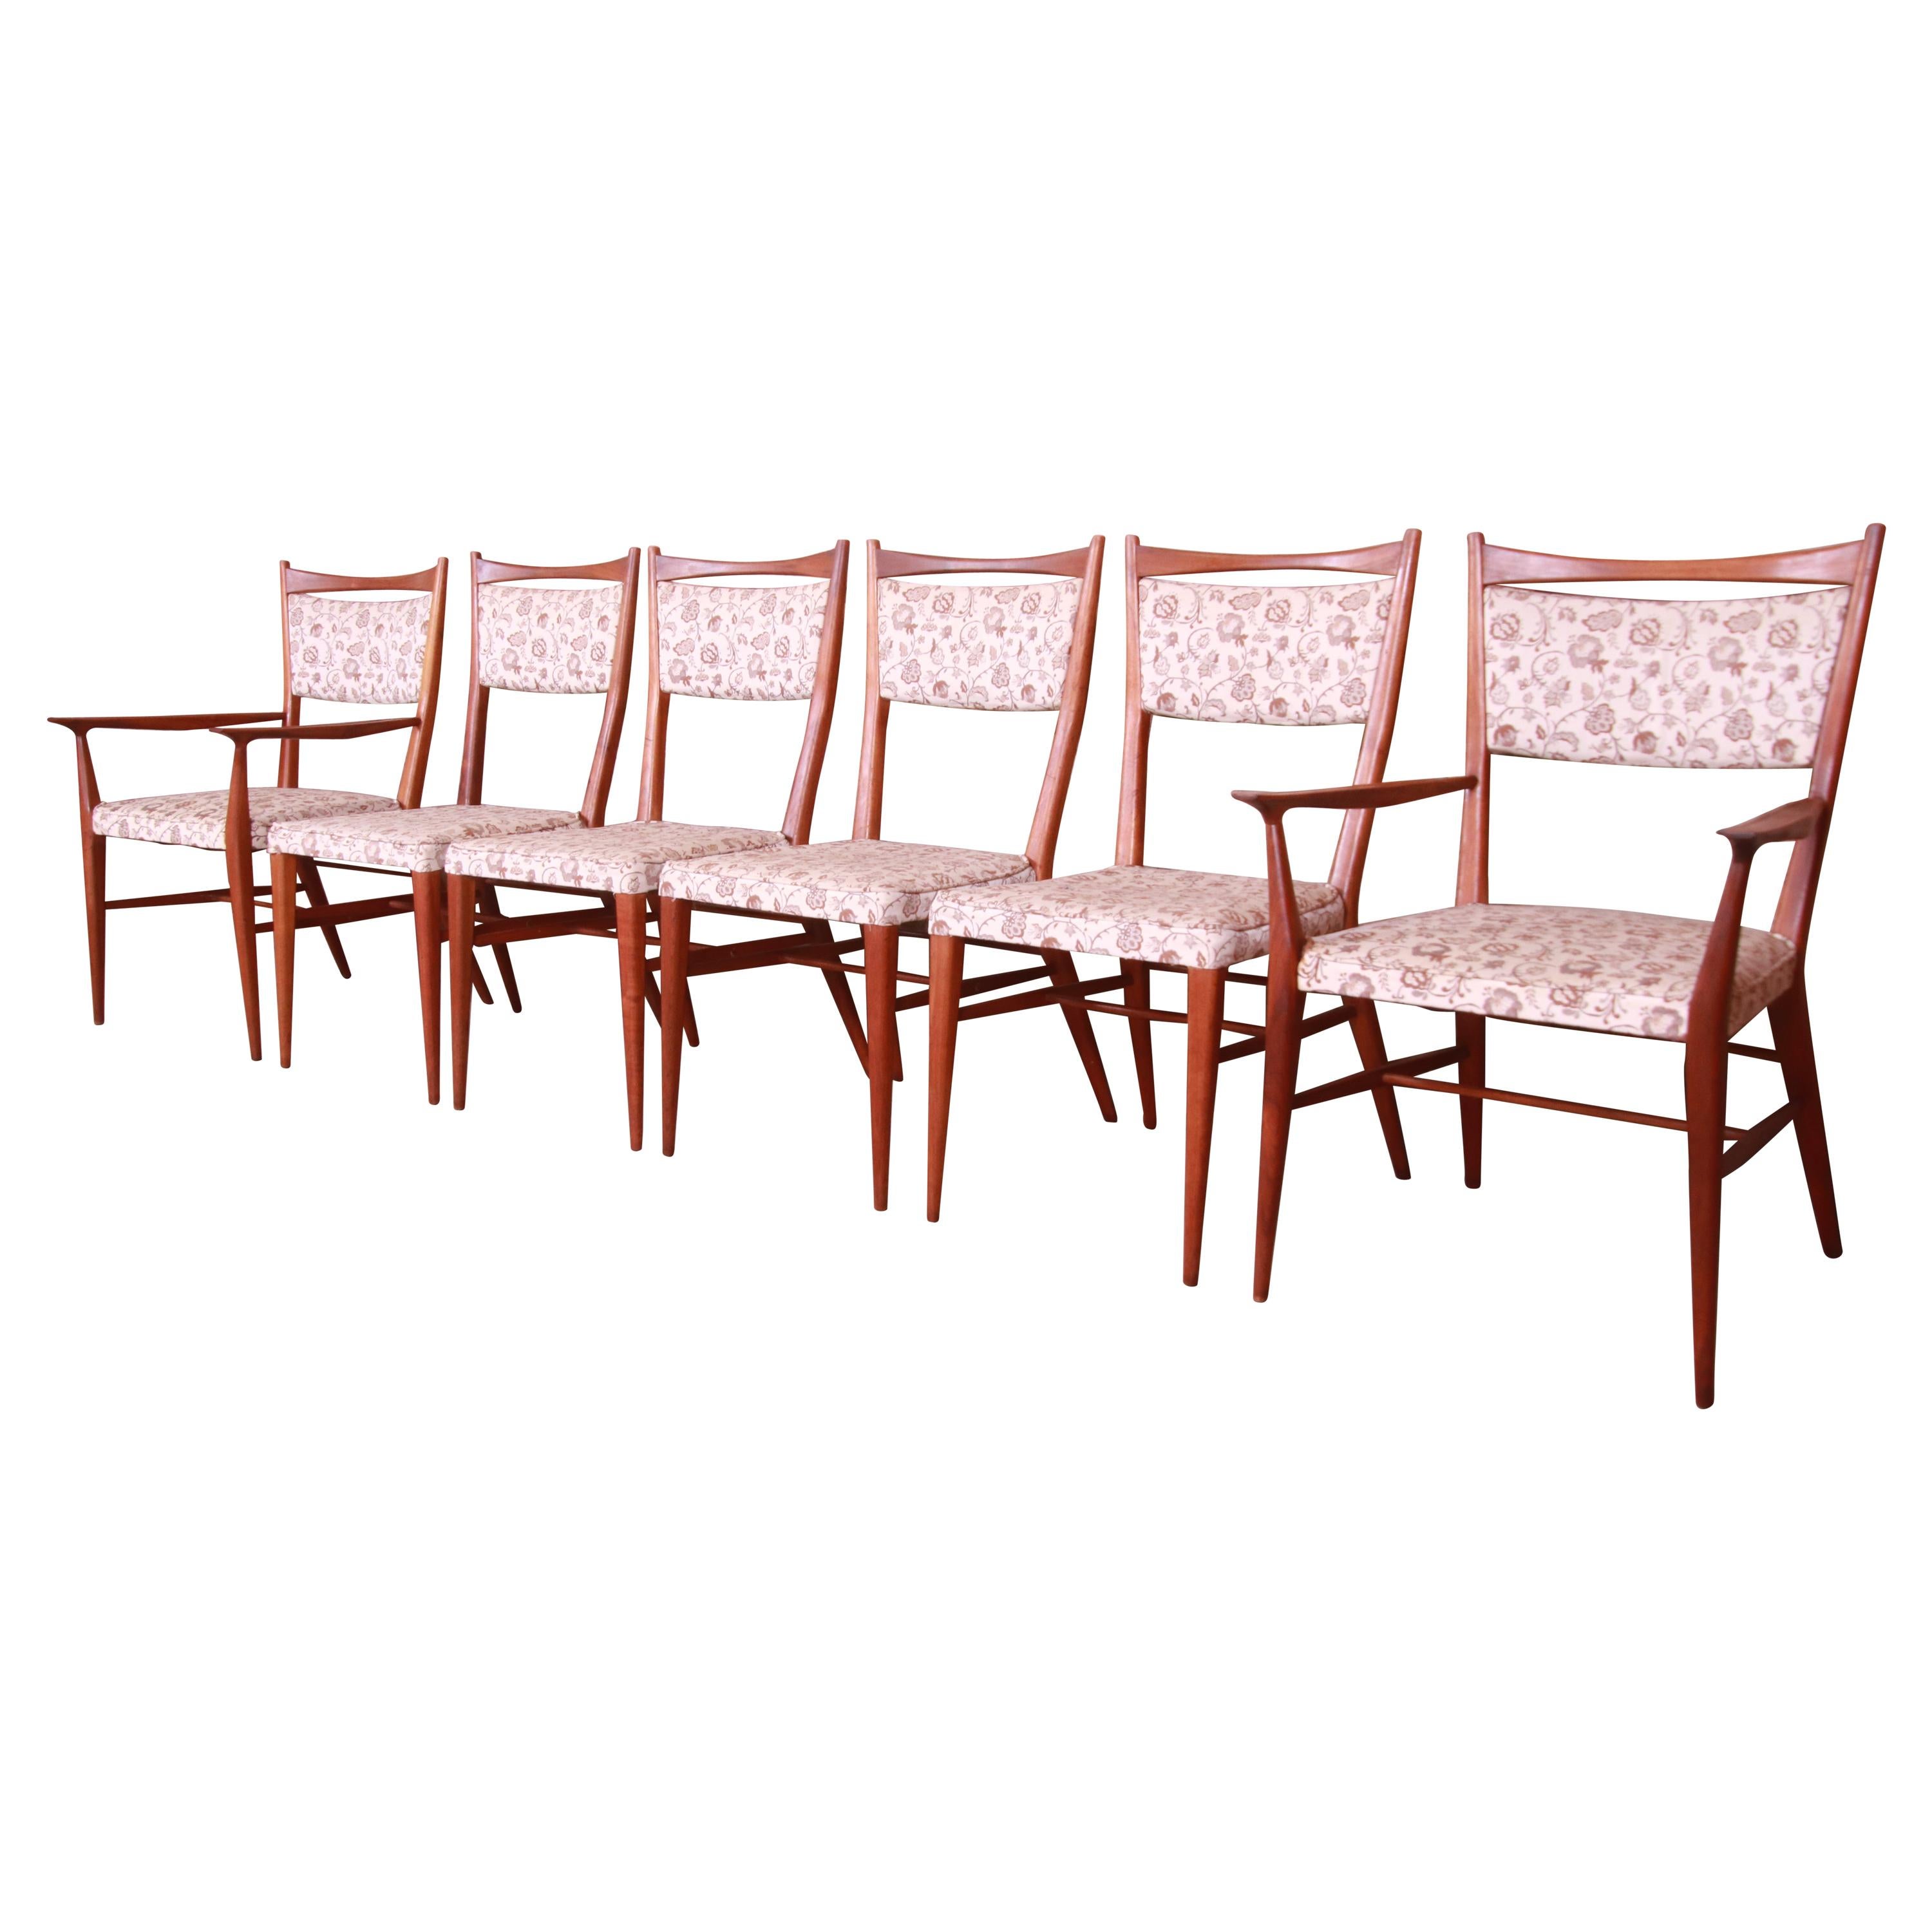 Paul McCobb for Directional Sculpted Walnut Dining Chairs, Set of Six